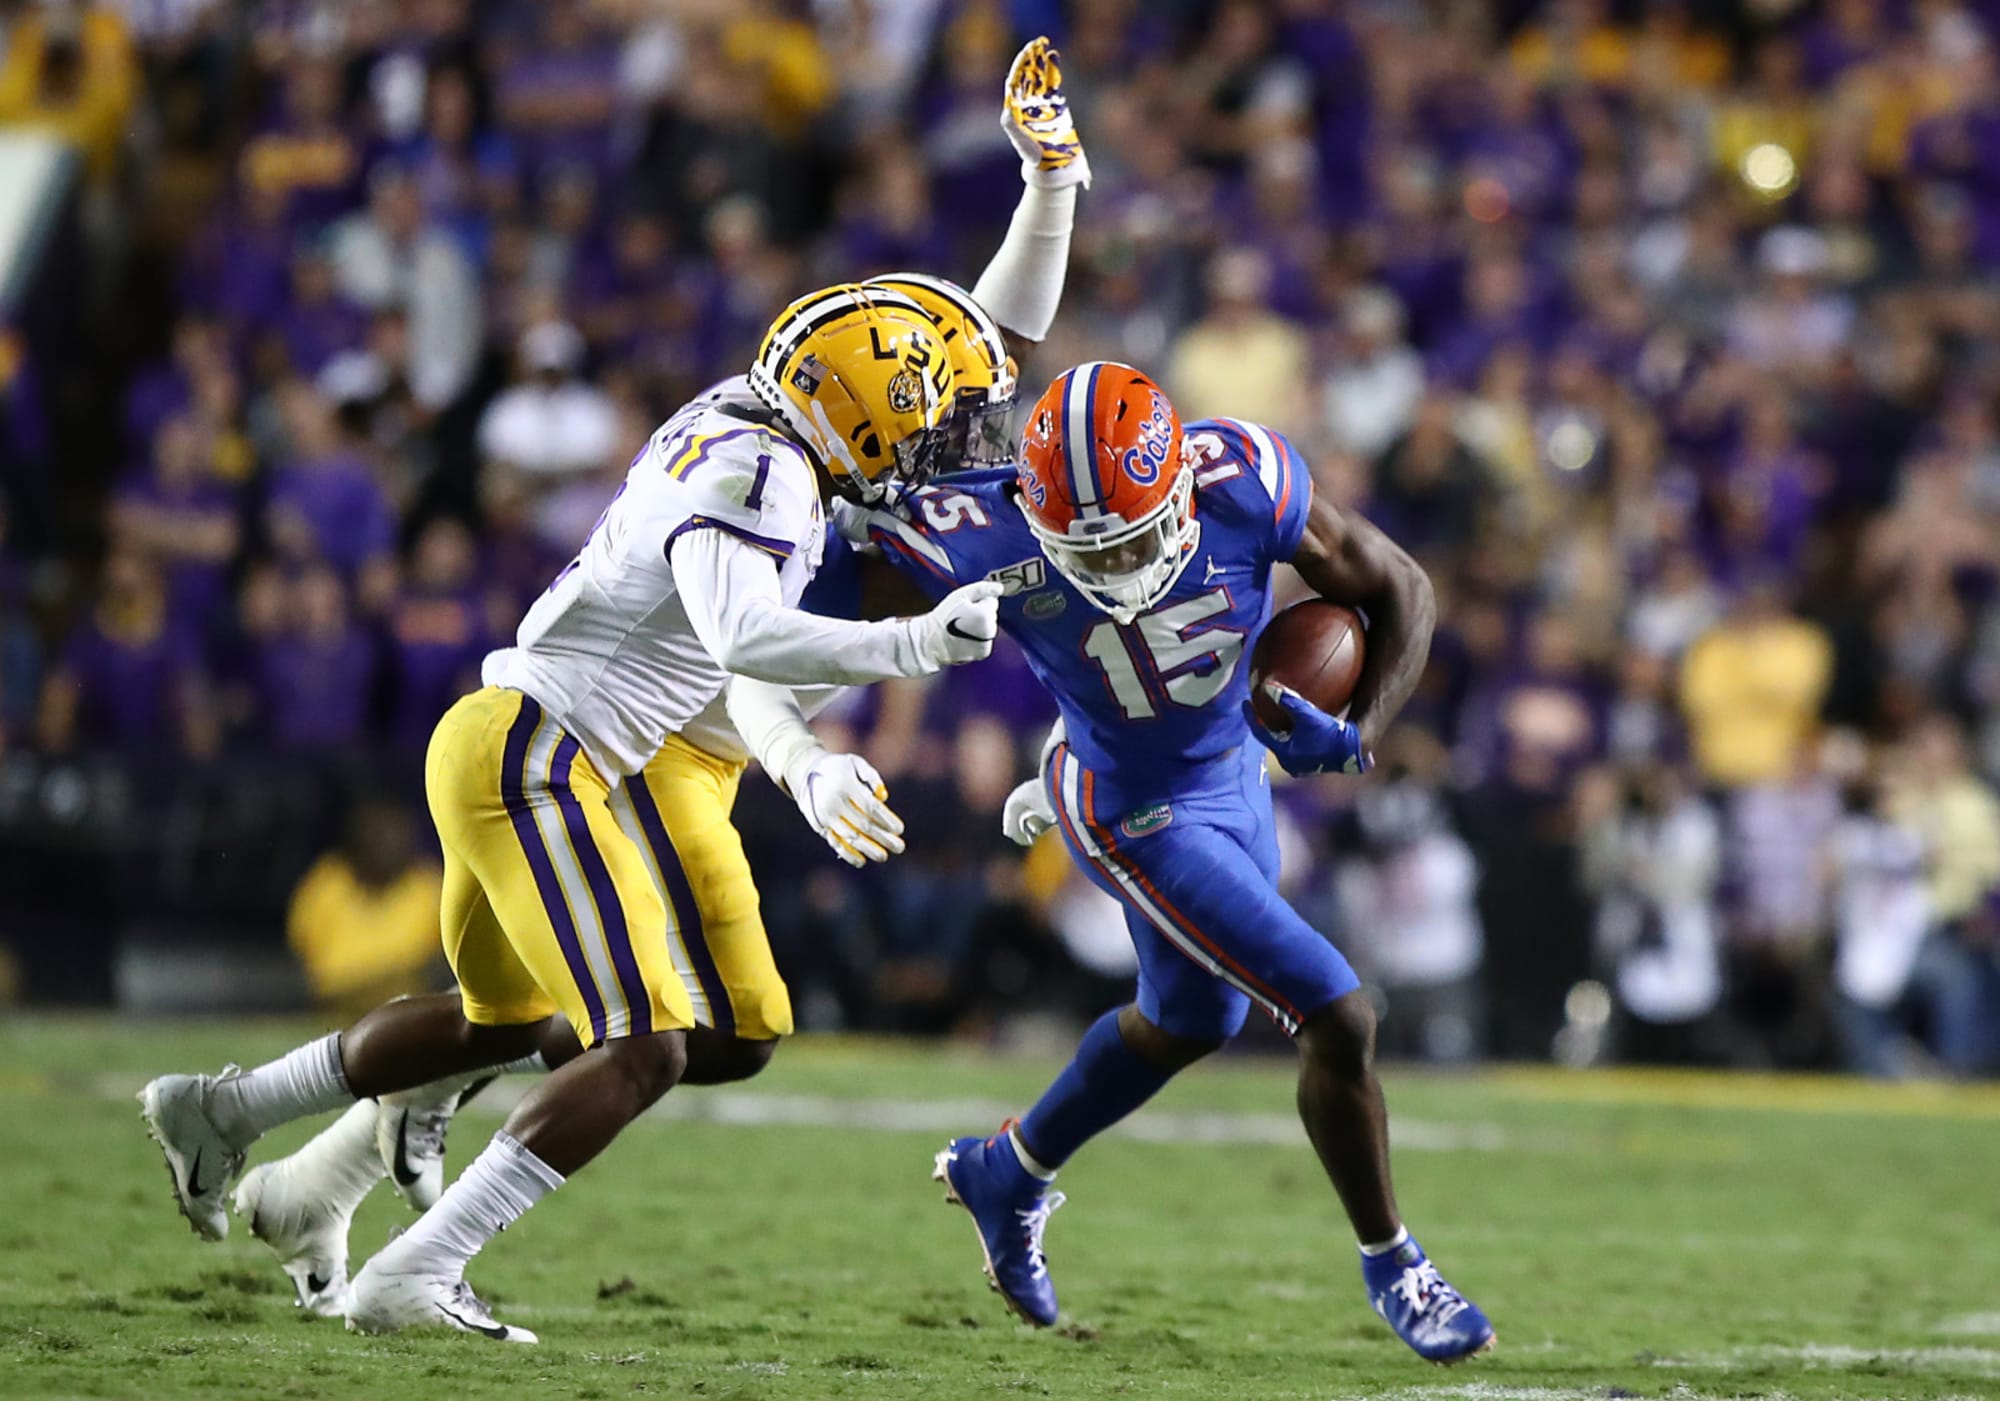 2020 NFL Draft: Top 10 most athletic prospects by position